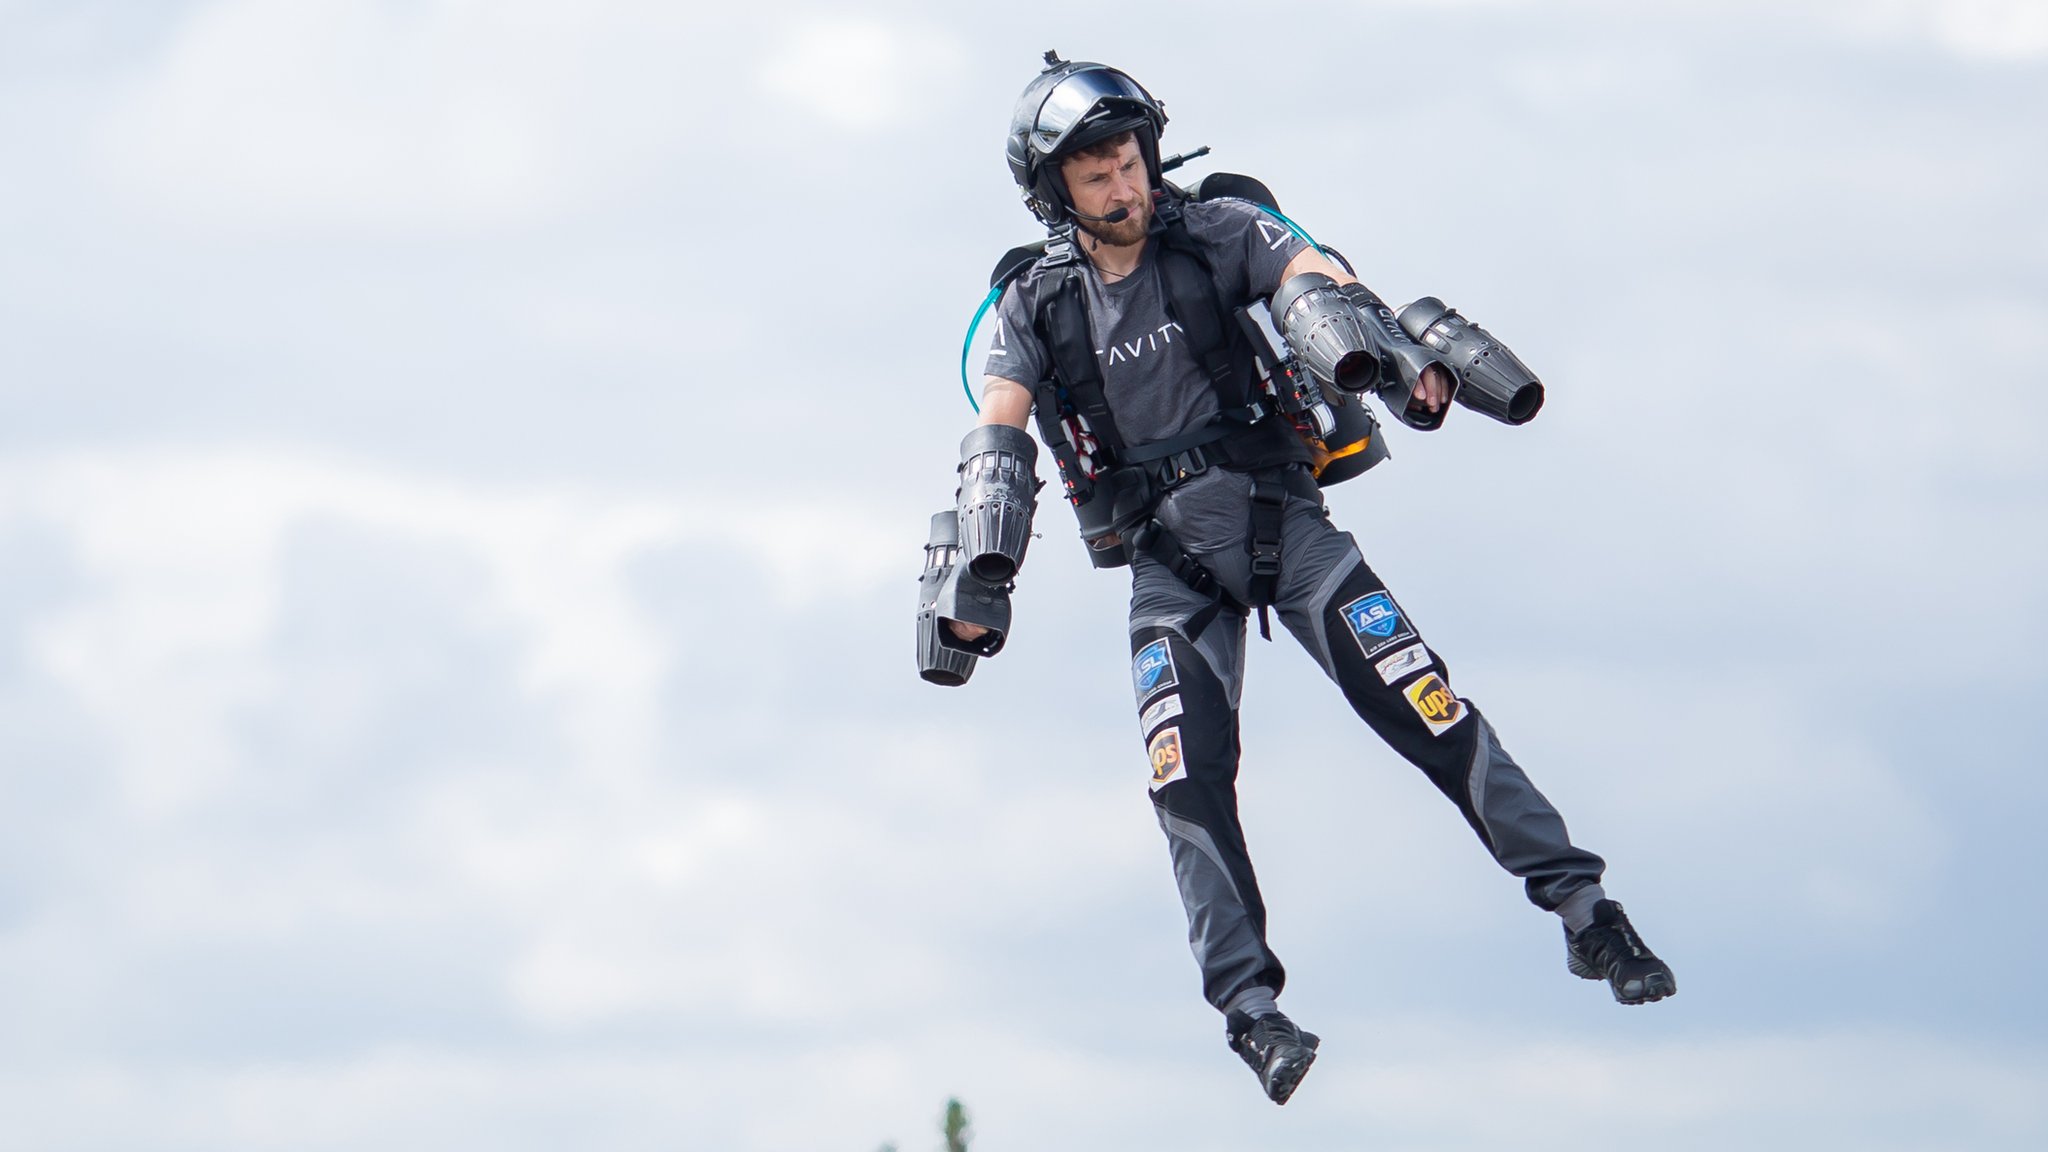 How Close Are Humans To Actually Having Jetpacks?